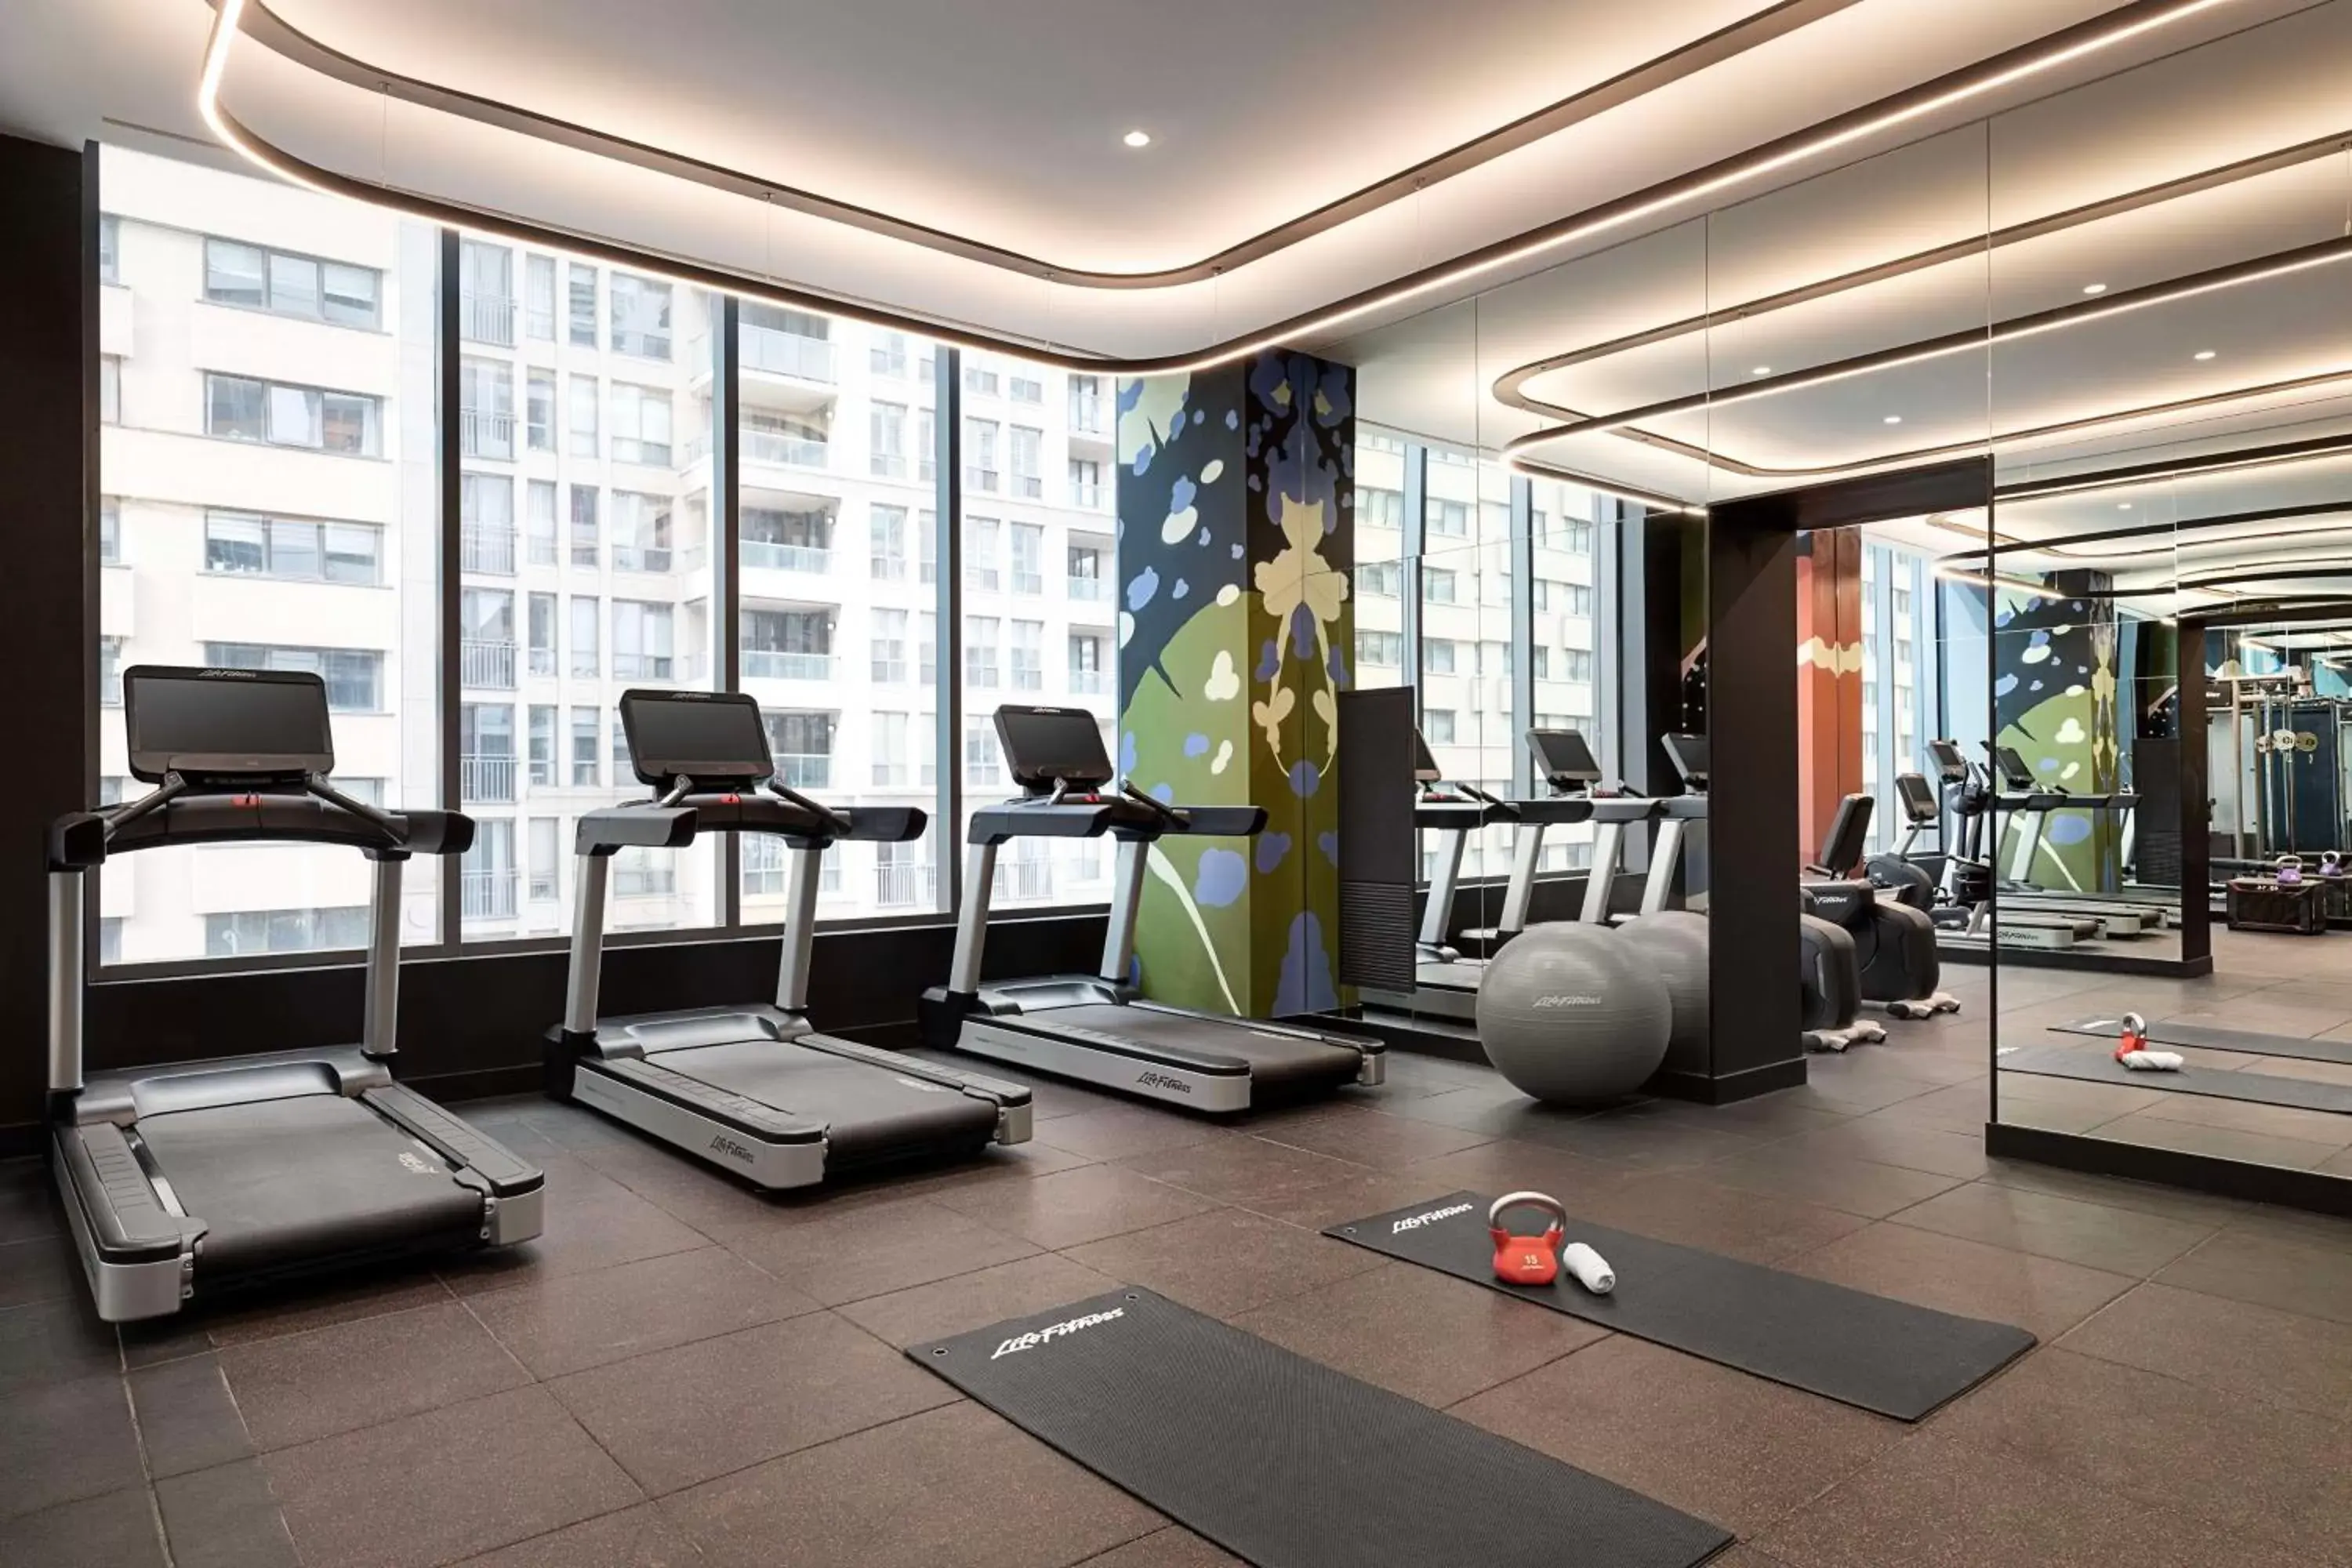 Fitness centre/facilities, Fitness Center/Facilities in Canopy By Hilton Toronto Yorkville